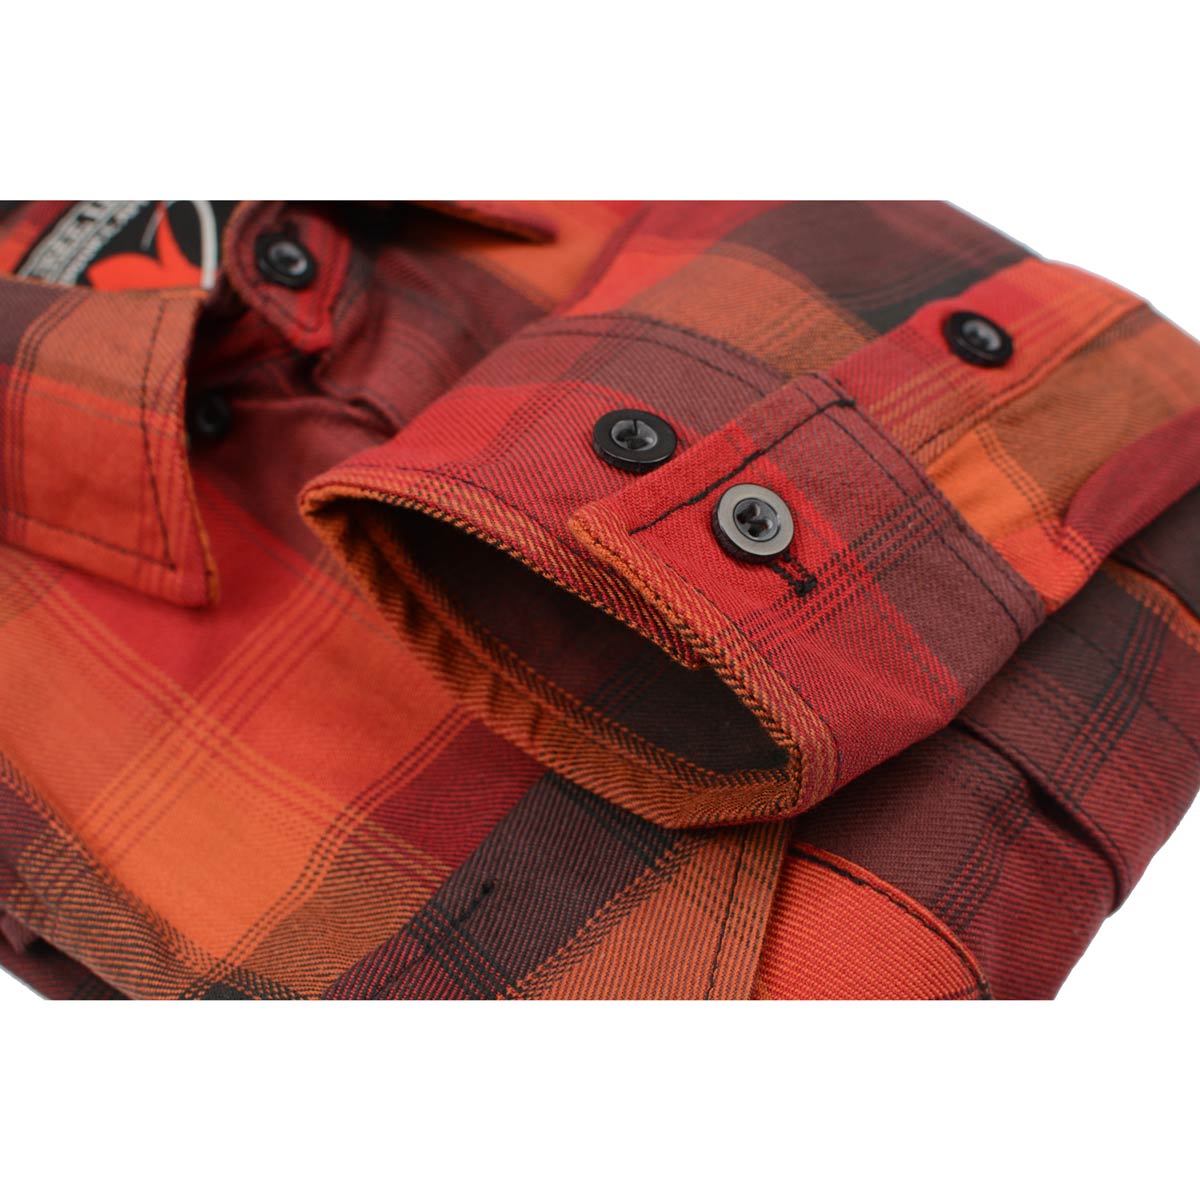 Milwaukee Leather Men's Flannel Plaid Shirt Orange with Red and Black Long Sleeve Cotton Button Down Shirt MNG11641